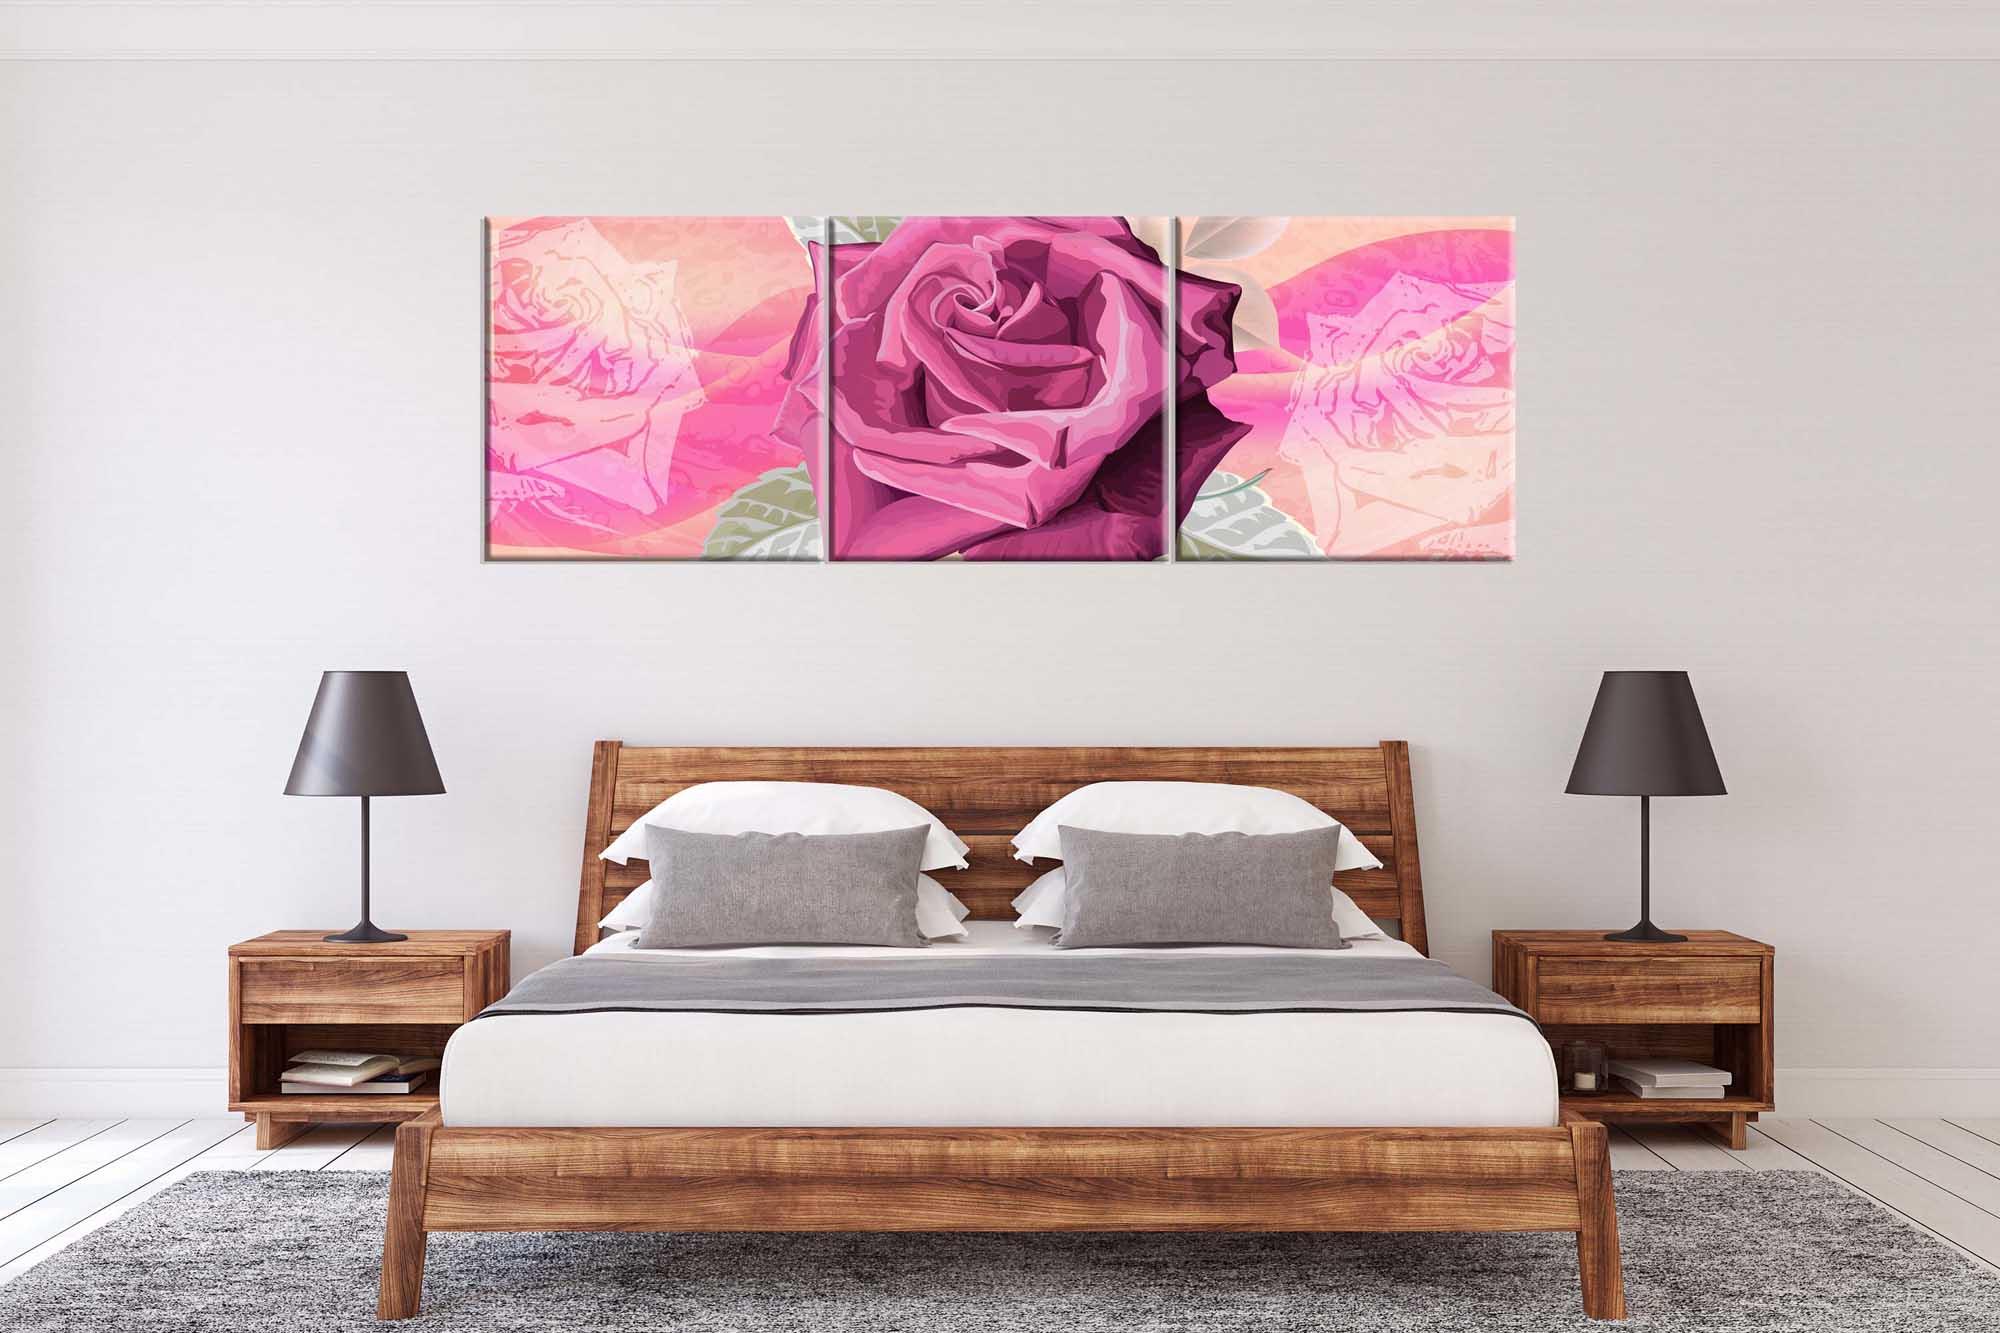 Picture Modular picture - beautiful blooming rose 2